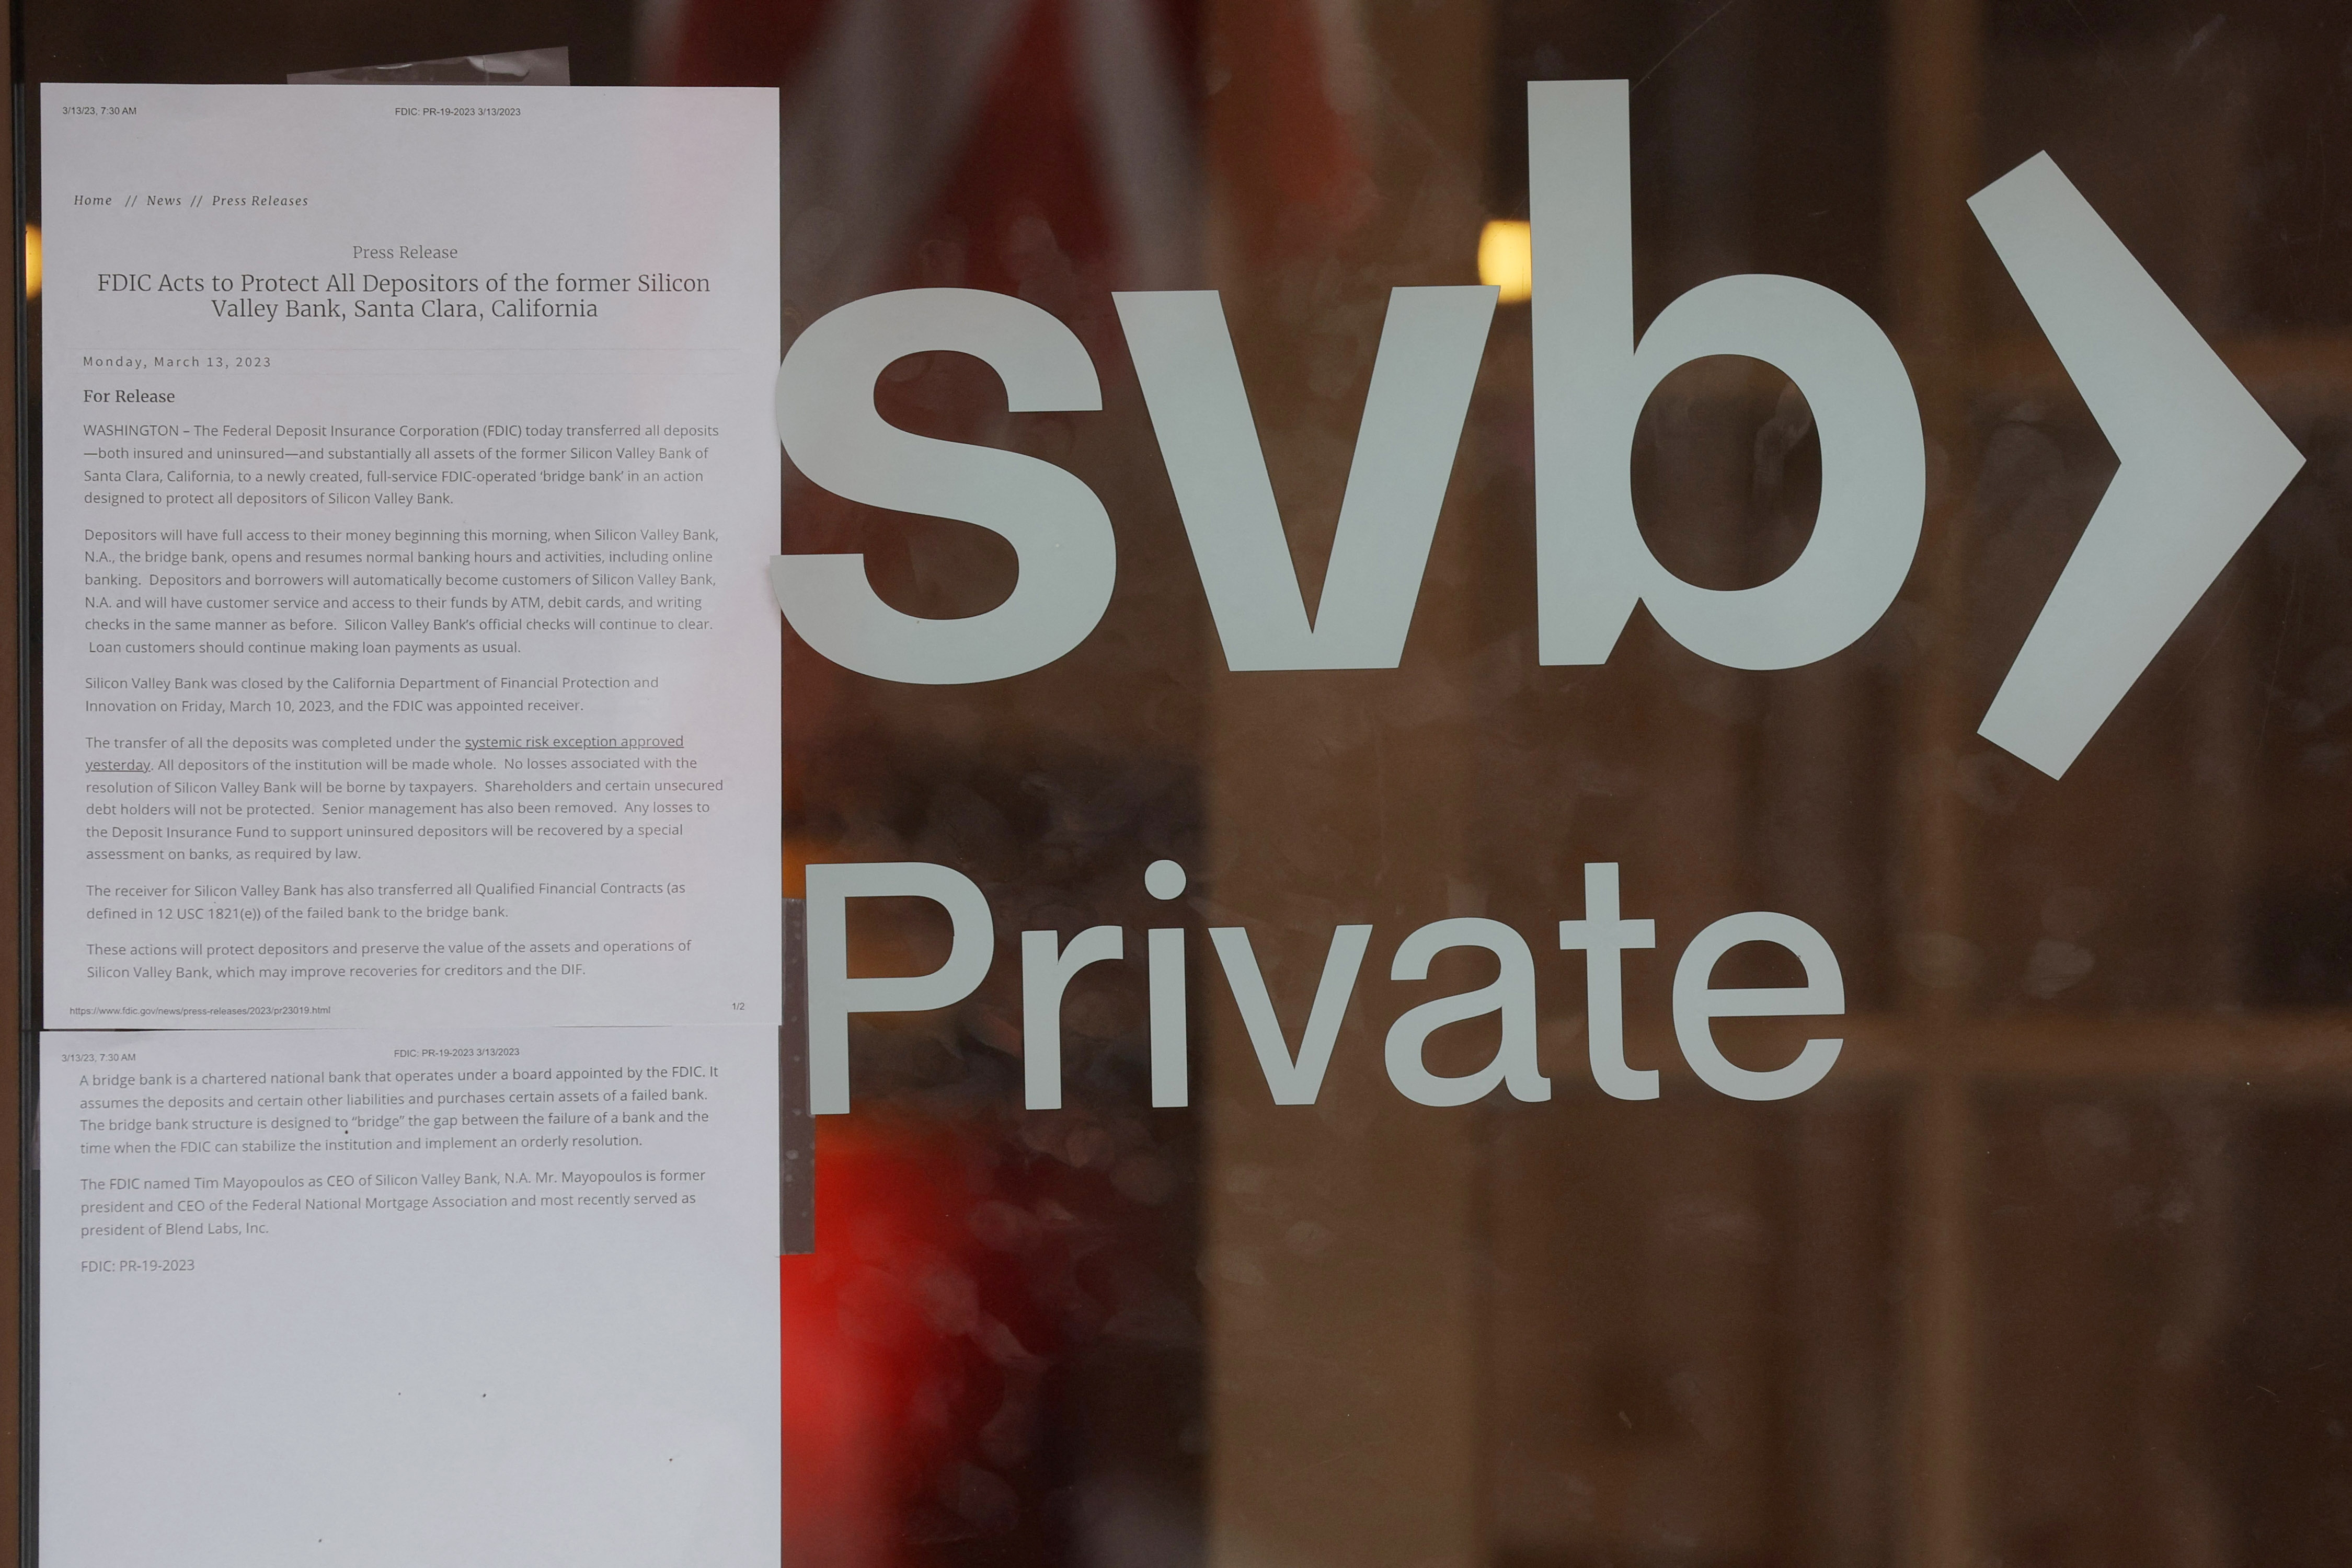 A press release from the (FDIC) is taped to the door of a branch of Silicon Valley Bank in Wellesley